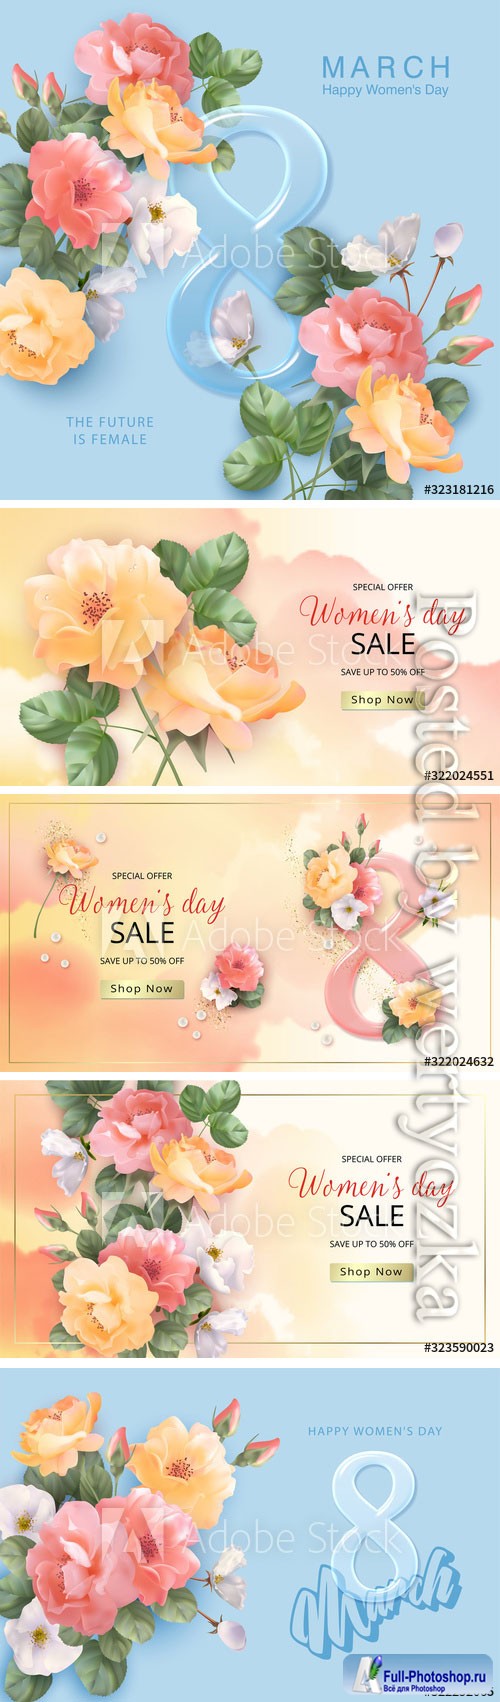 Vector banner March 8, floral background